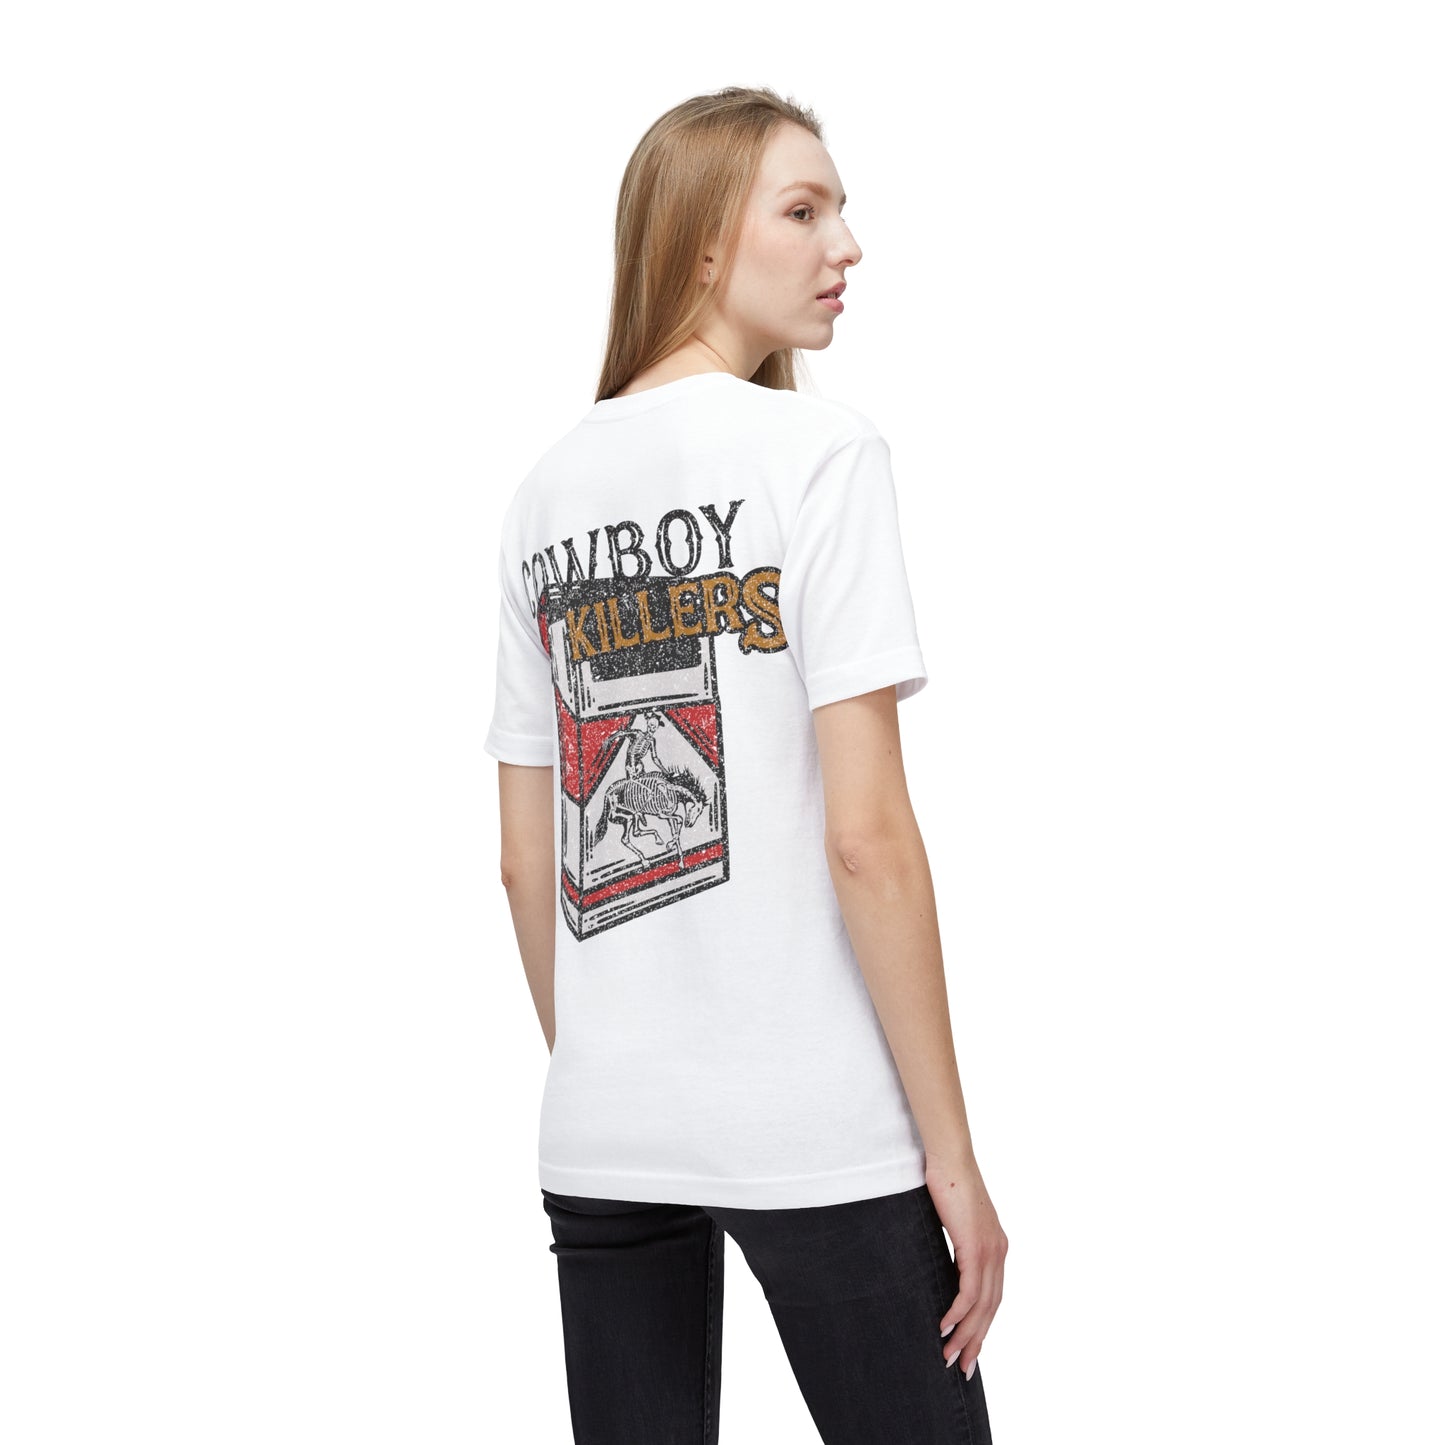 Midweight Cowboy Killer T-shirt, Made in US